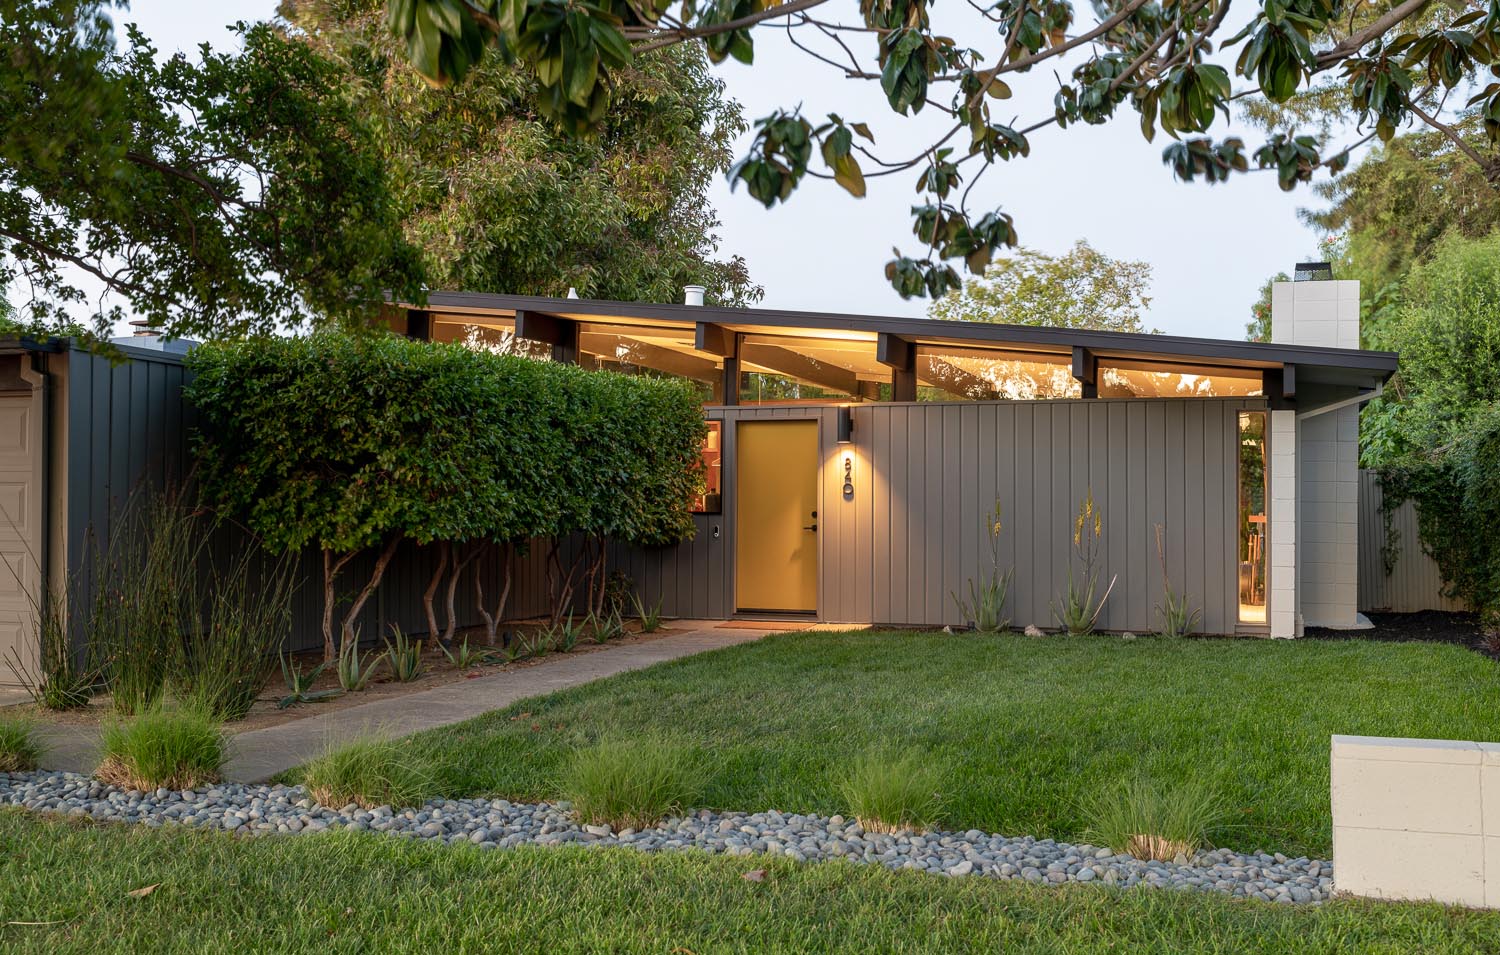 The new facade of this Eichler house has a light brown exterior which allows the plants to be showcased, while the concrete patio was replaced with grass.